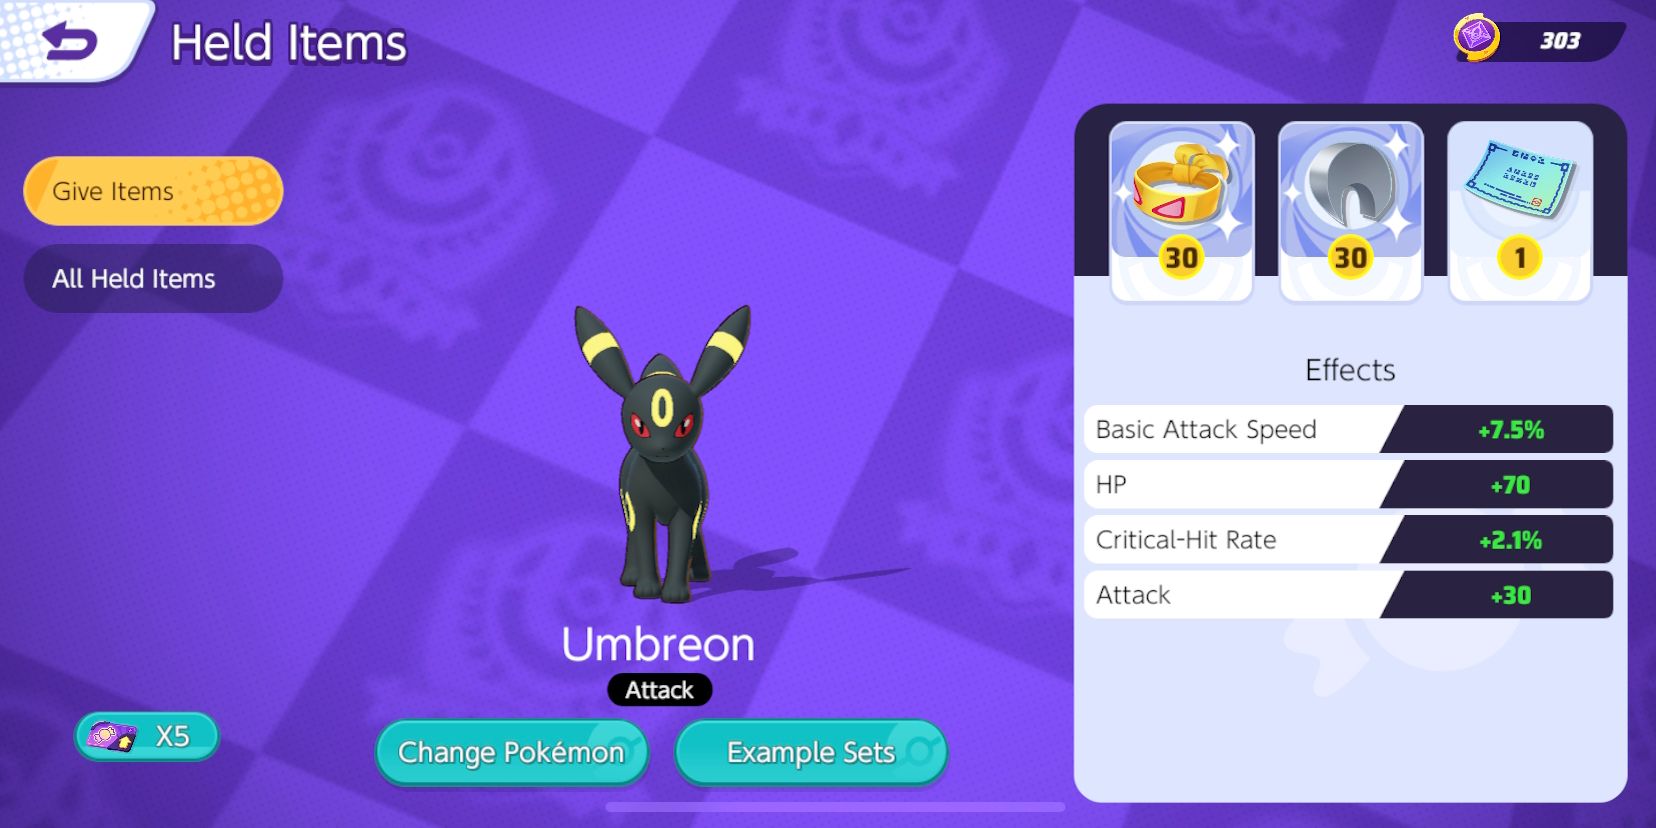 Umbreon's holdings selection screen with Muscle Bands, Razor Claws, and Weakness policies selected.